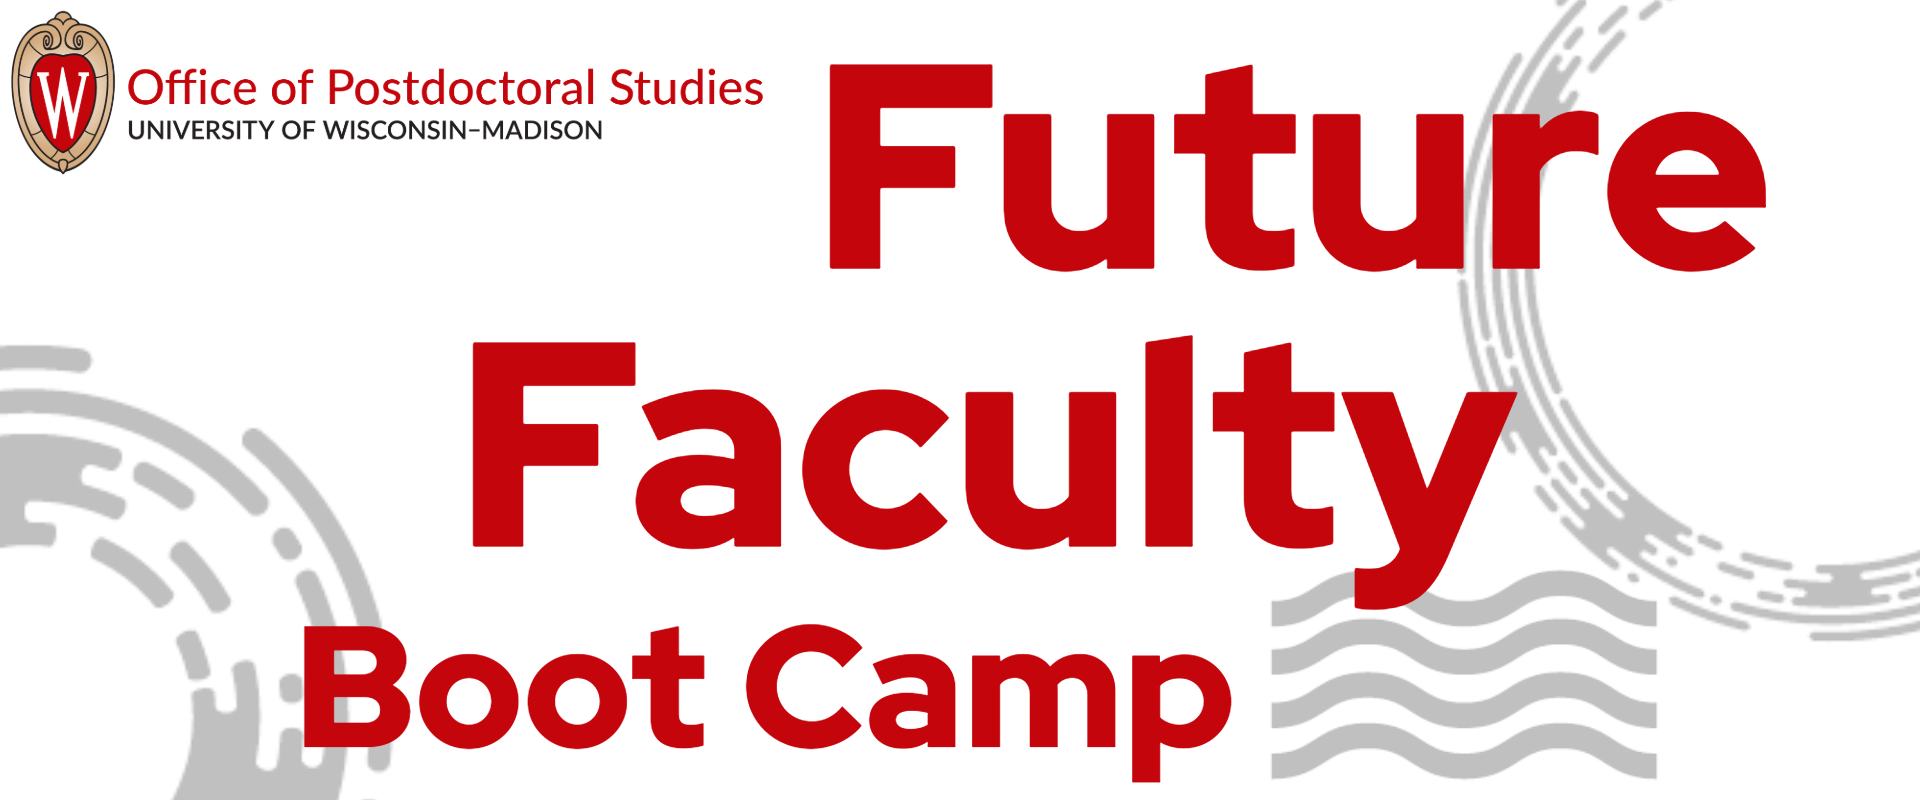 Banner with the words Future Faculty Boot Camp, the Office of Postdoctoral Studies logo, and several abstract geometric designs.